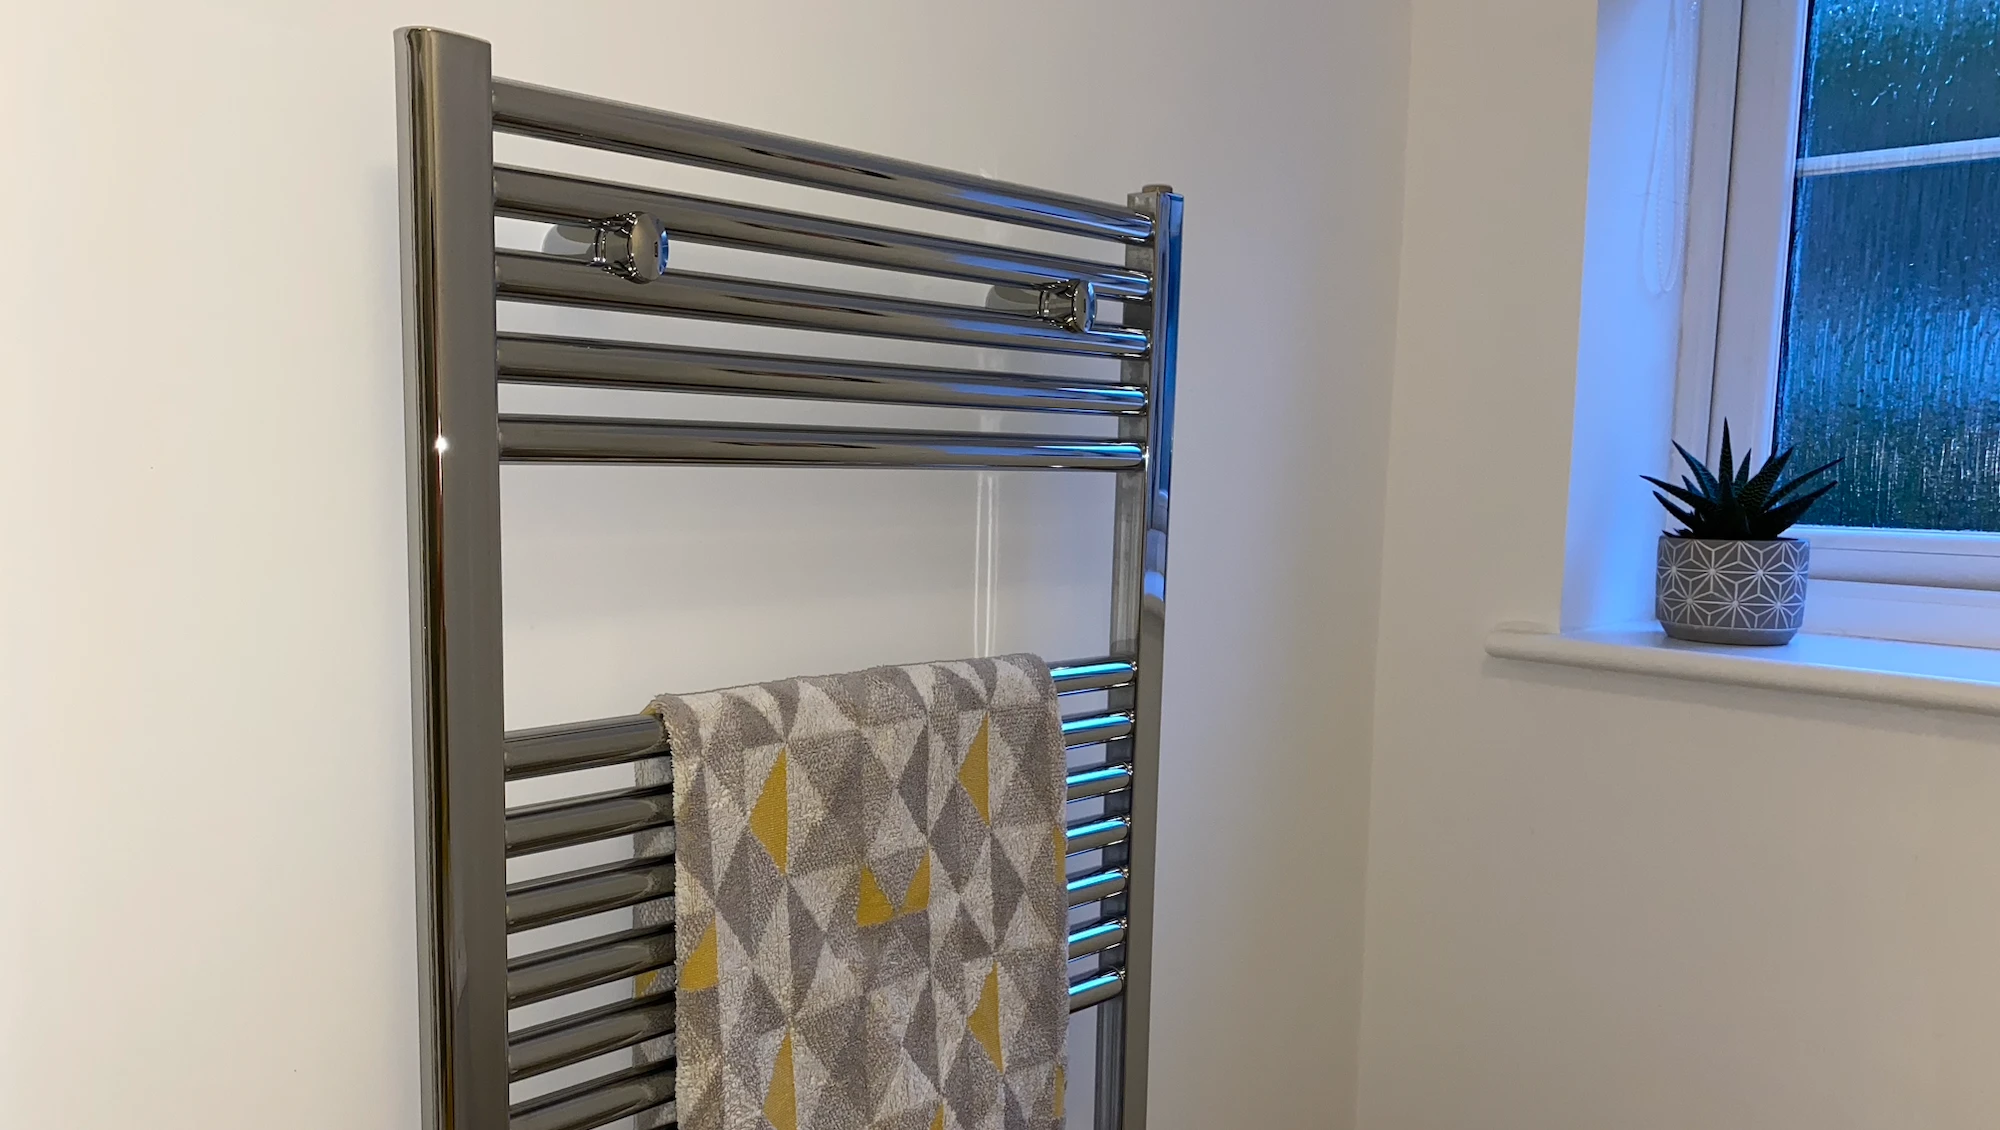 Fit an electric towel rail cost